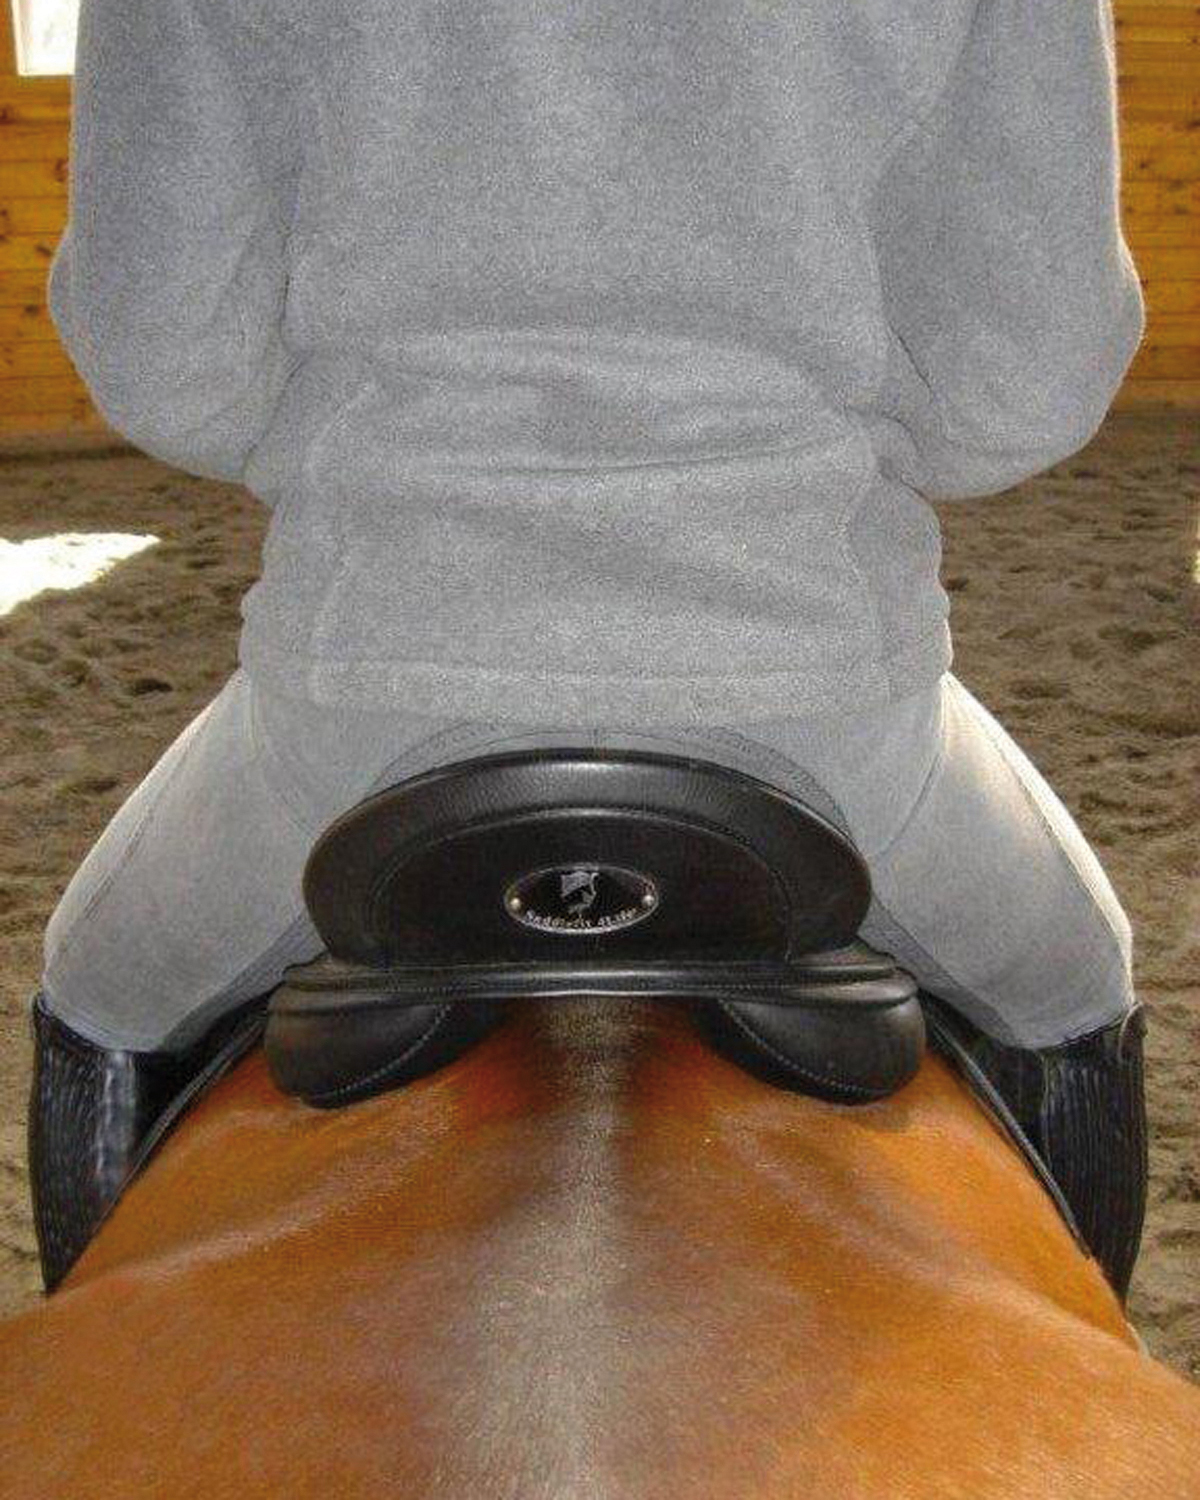 This saddle has a wide gullet channel with good distribution of the rider's weight on the horse's saddle support area.